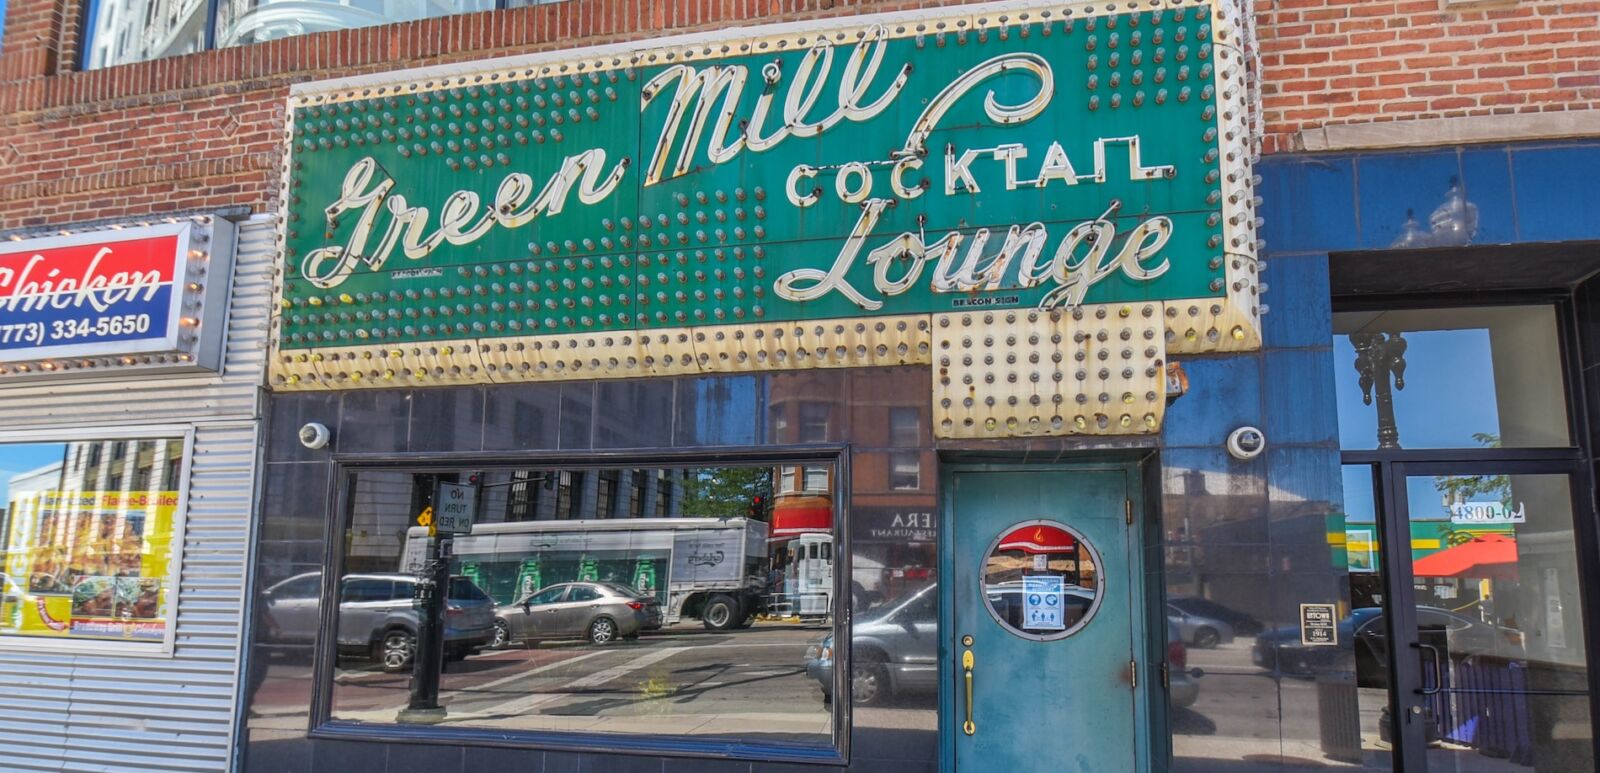 America’s Most Historic Bars: Green Mill Cocktail Lounge. Photo via Shutterstock.